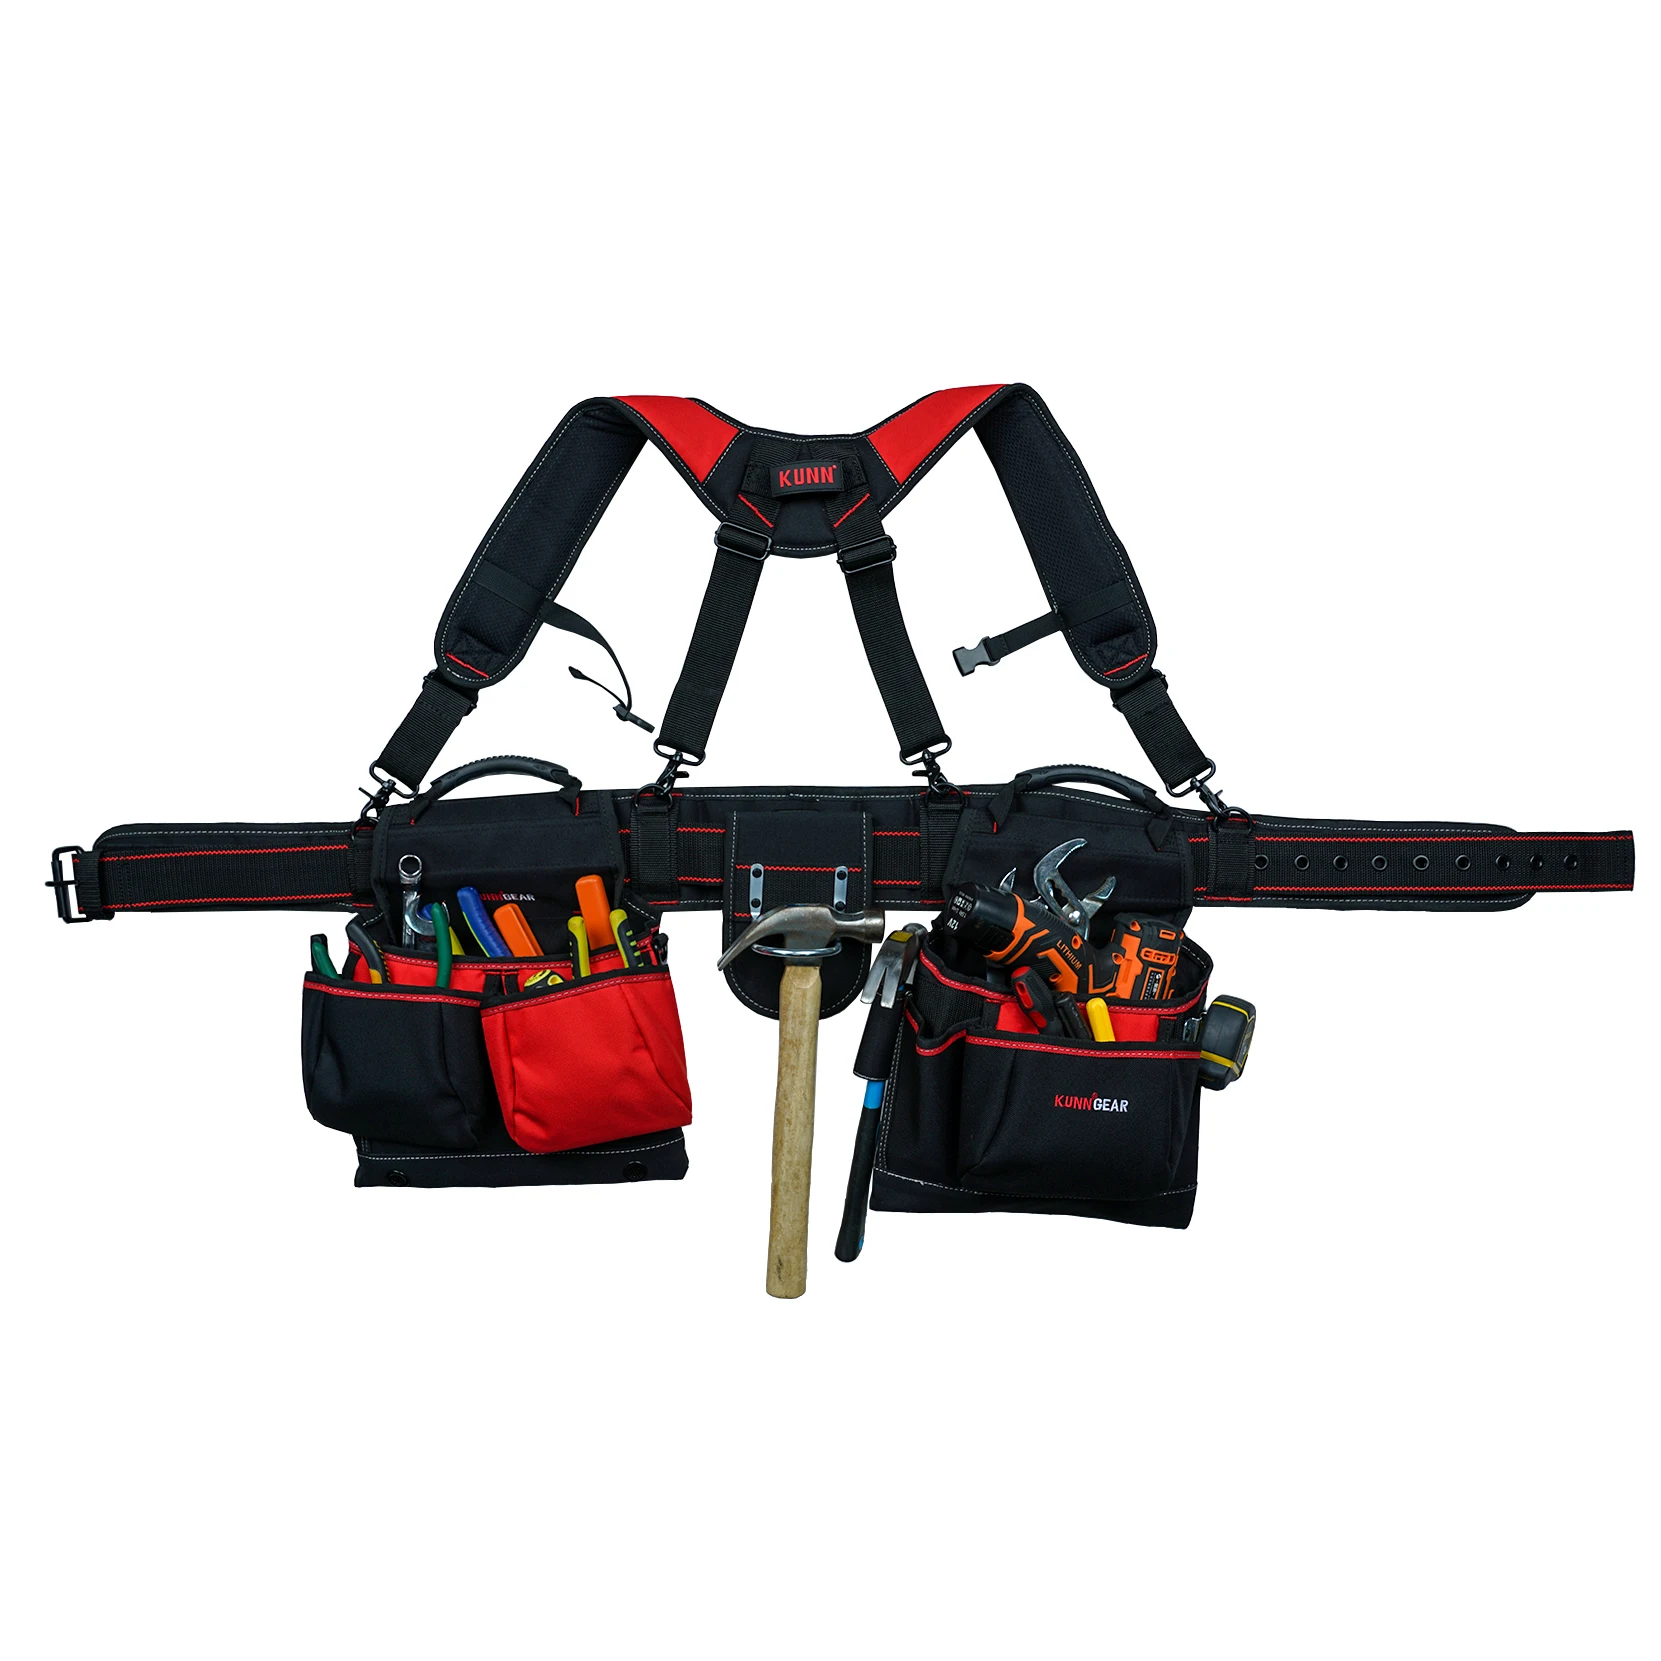 

KUNN Tool Belt with Suspenders,Pro Framer Belt/Suspenders Combo Apron for Carpenter,Construction and Electrician